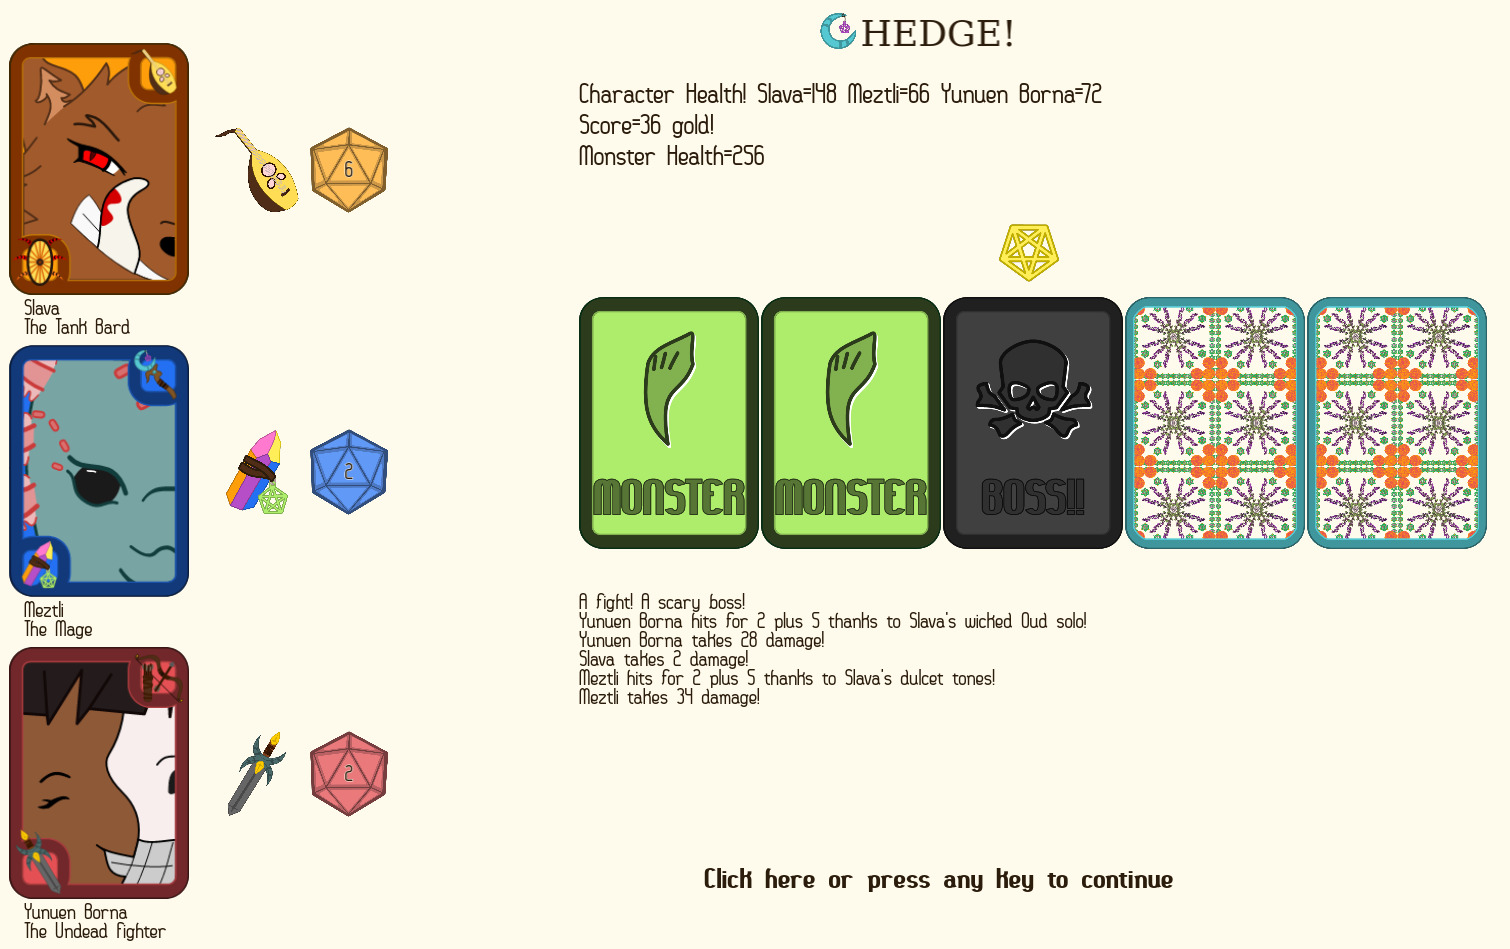 A screenshot from the HEDGE! prototype, showing the character cards at the left, and several dungeon cards in play.